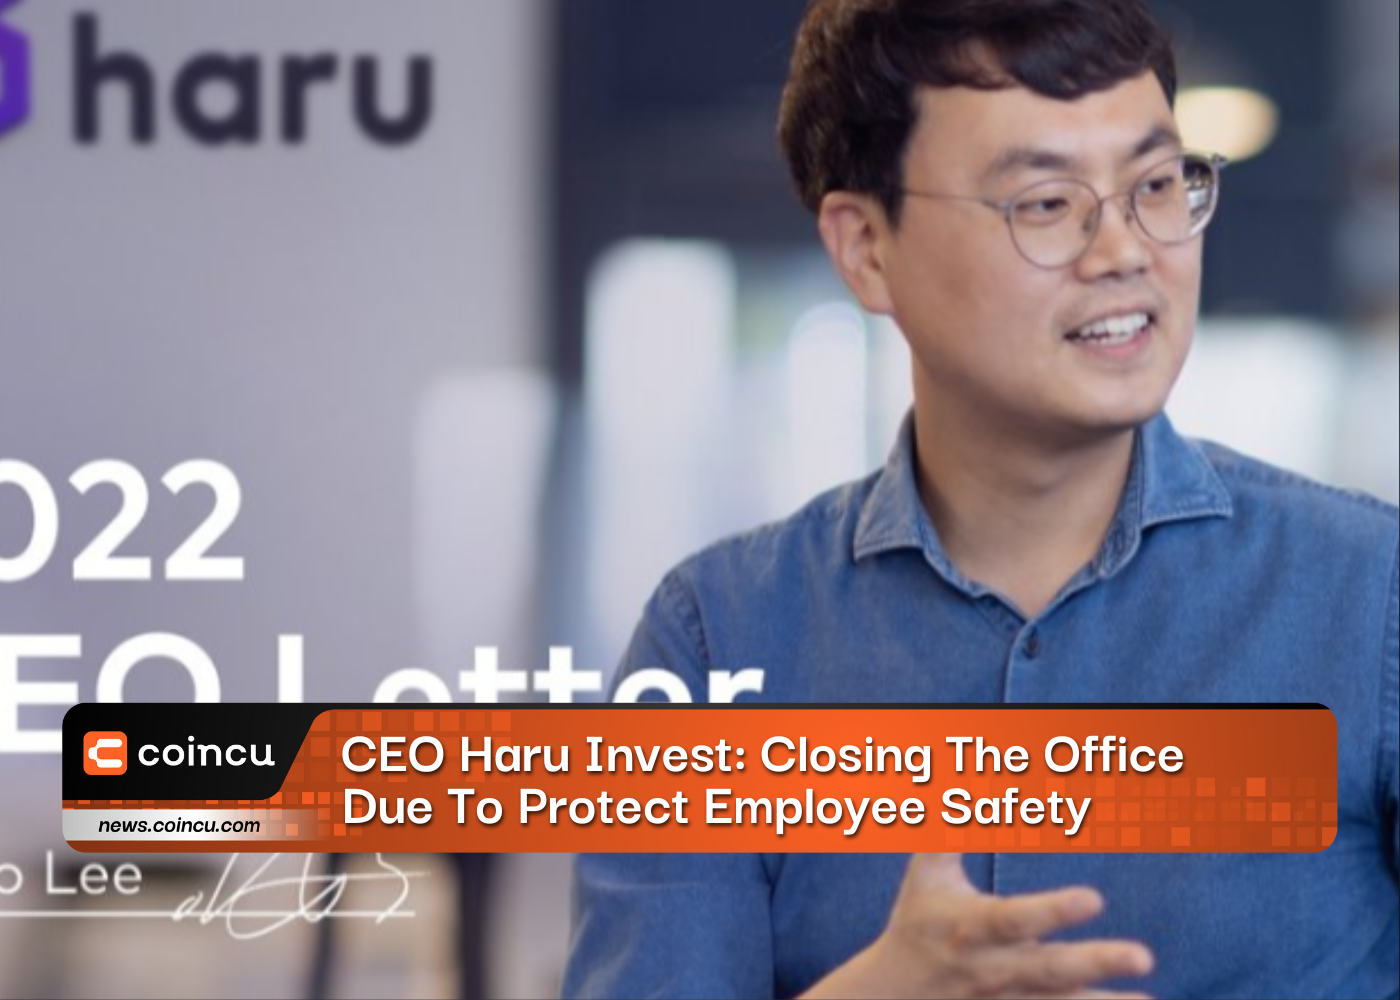 CEO Haru Invest: Closing The Office Due To Protect Employee Safety